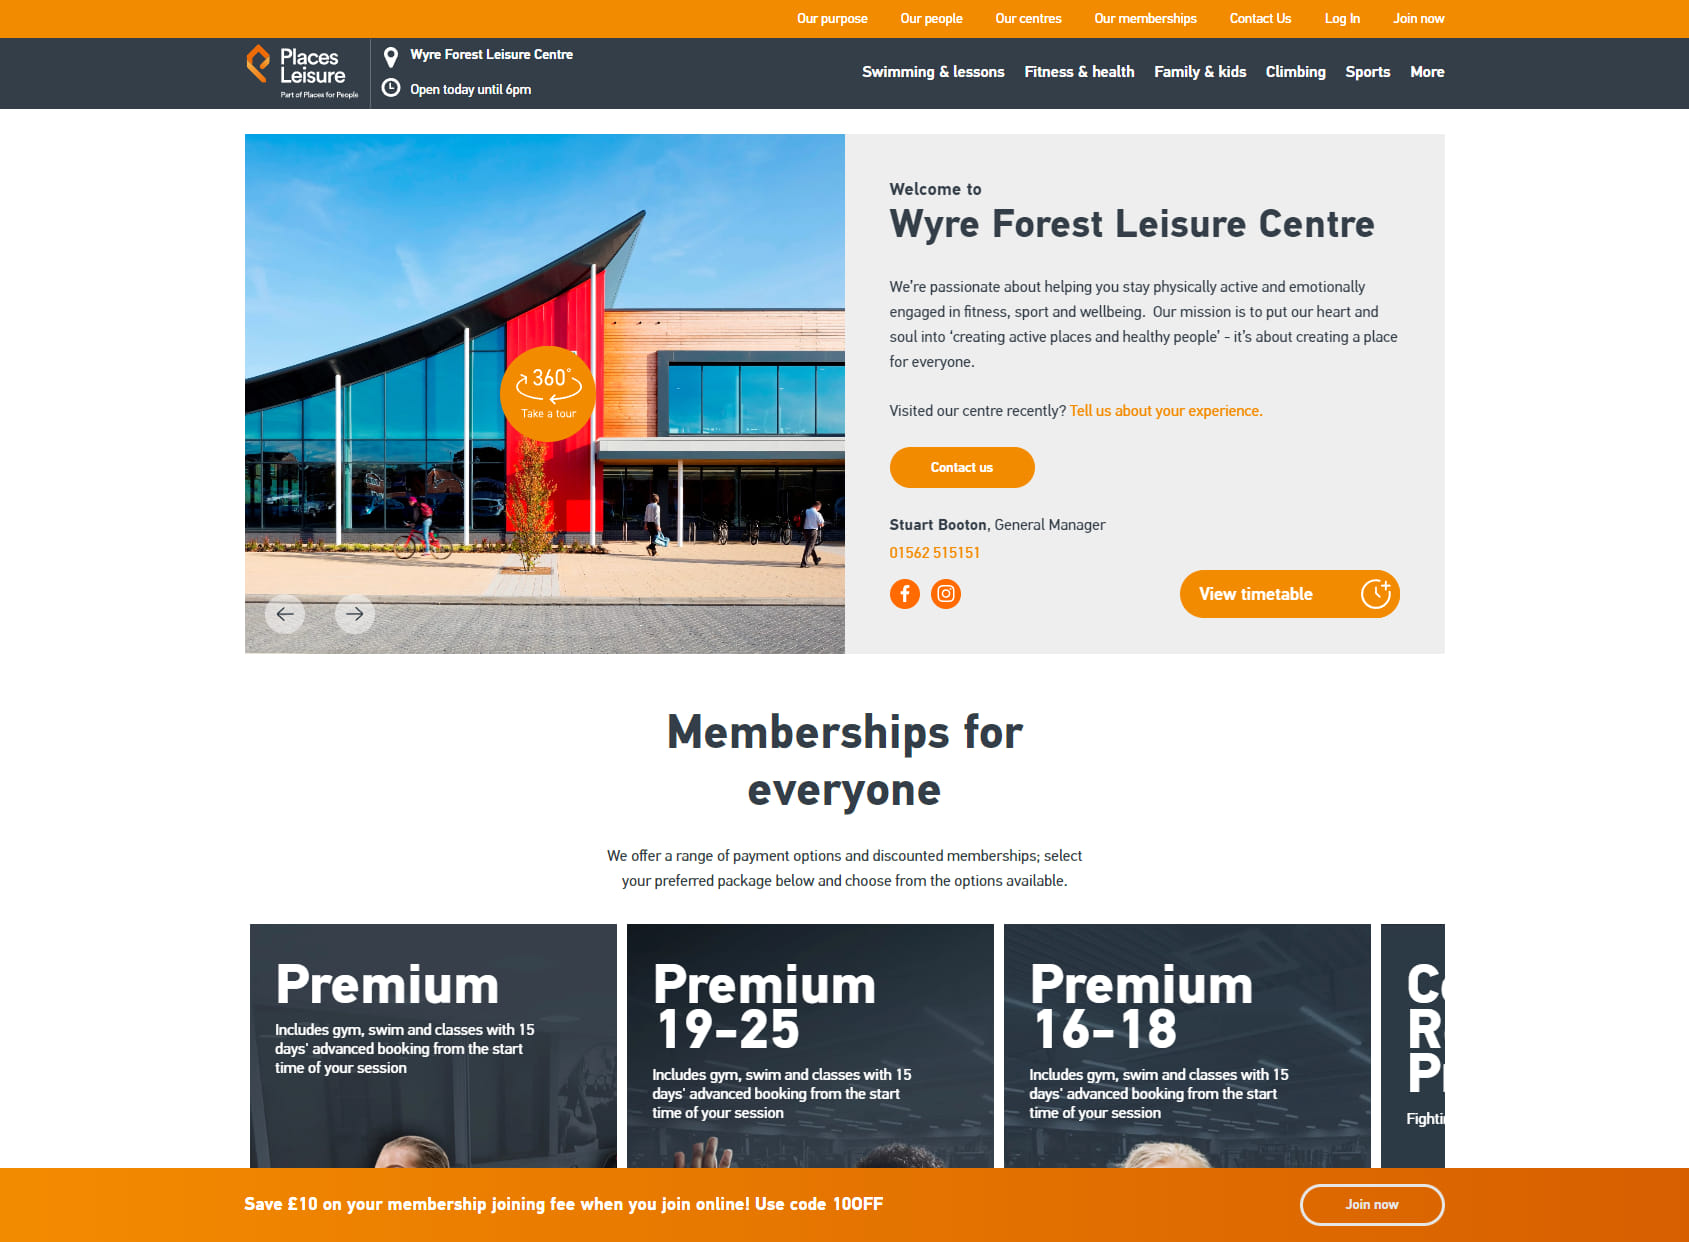 Wyre Forest Leisure Centre